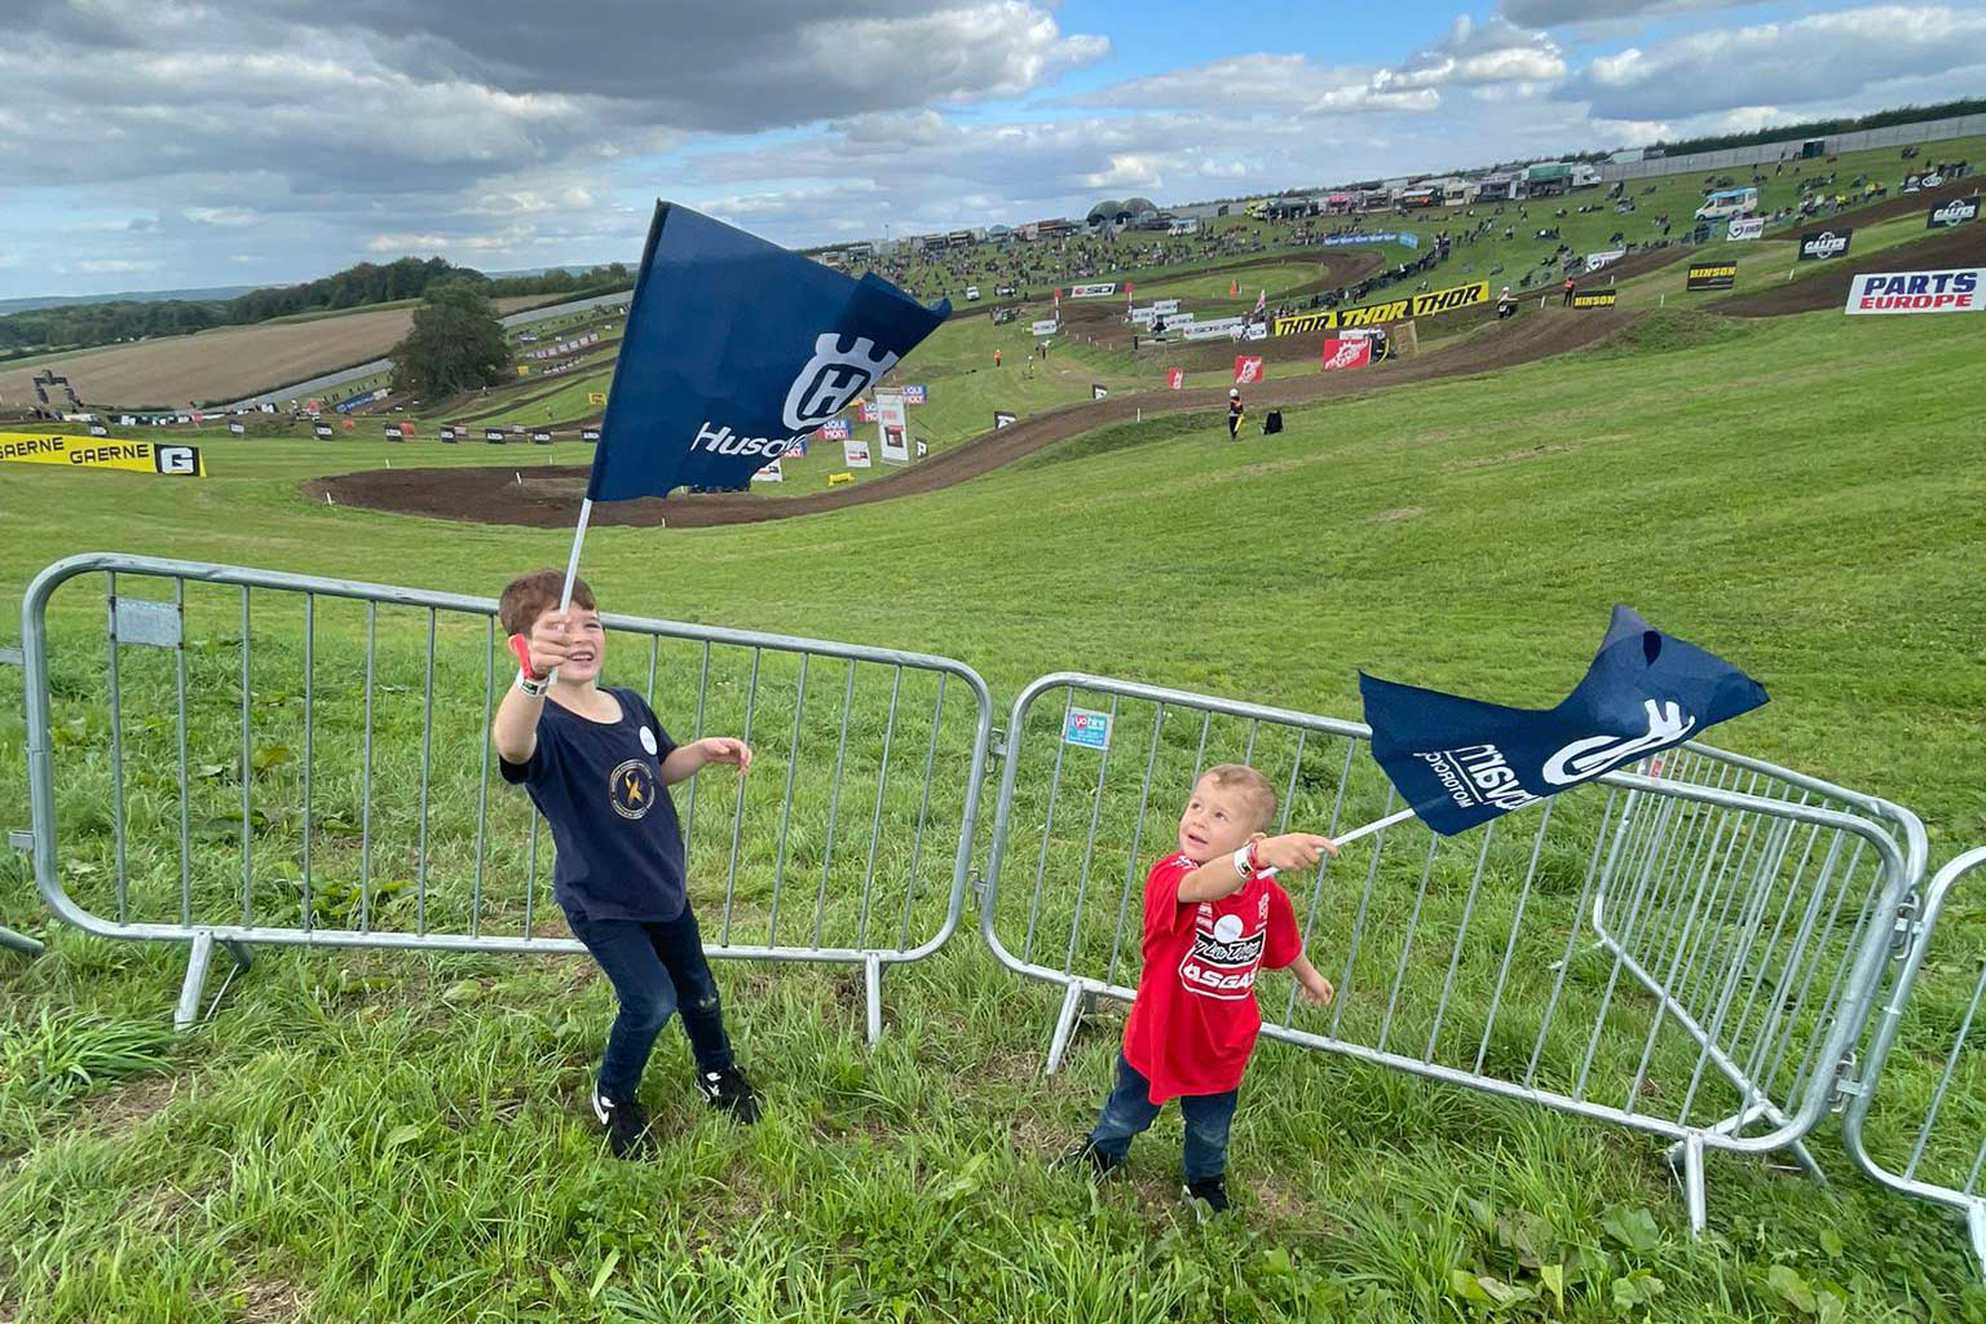 George and brother, Charlie waving flags with the British Motocross Championship course in the background.